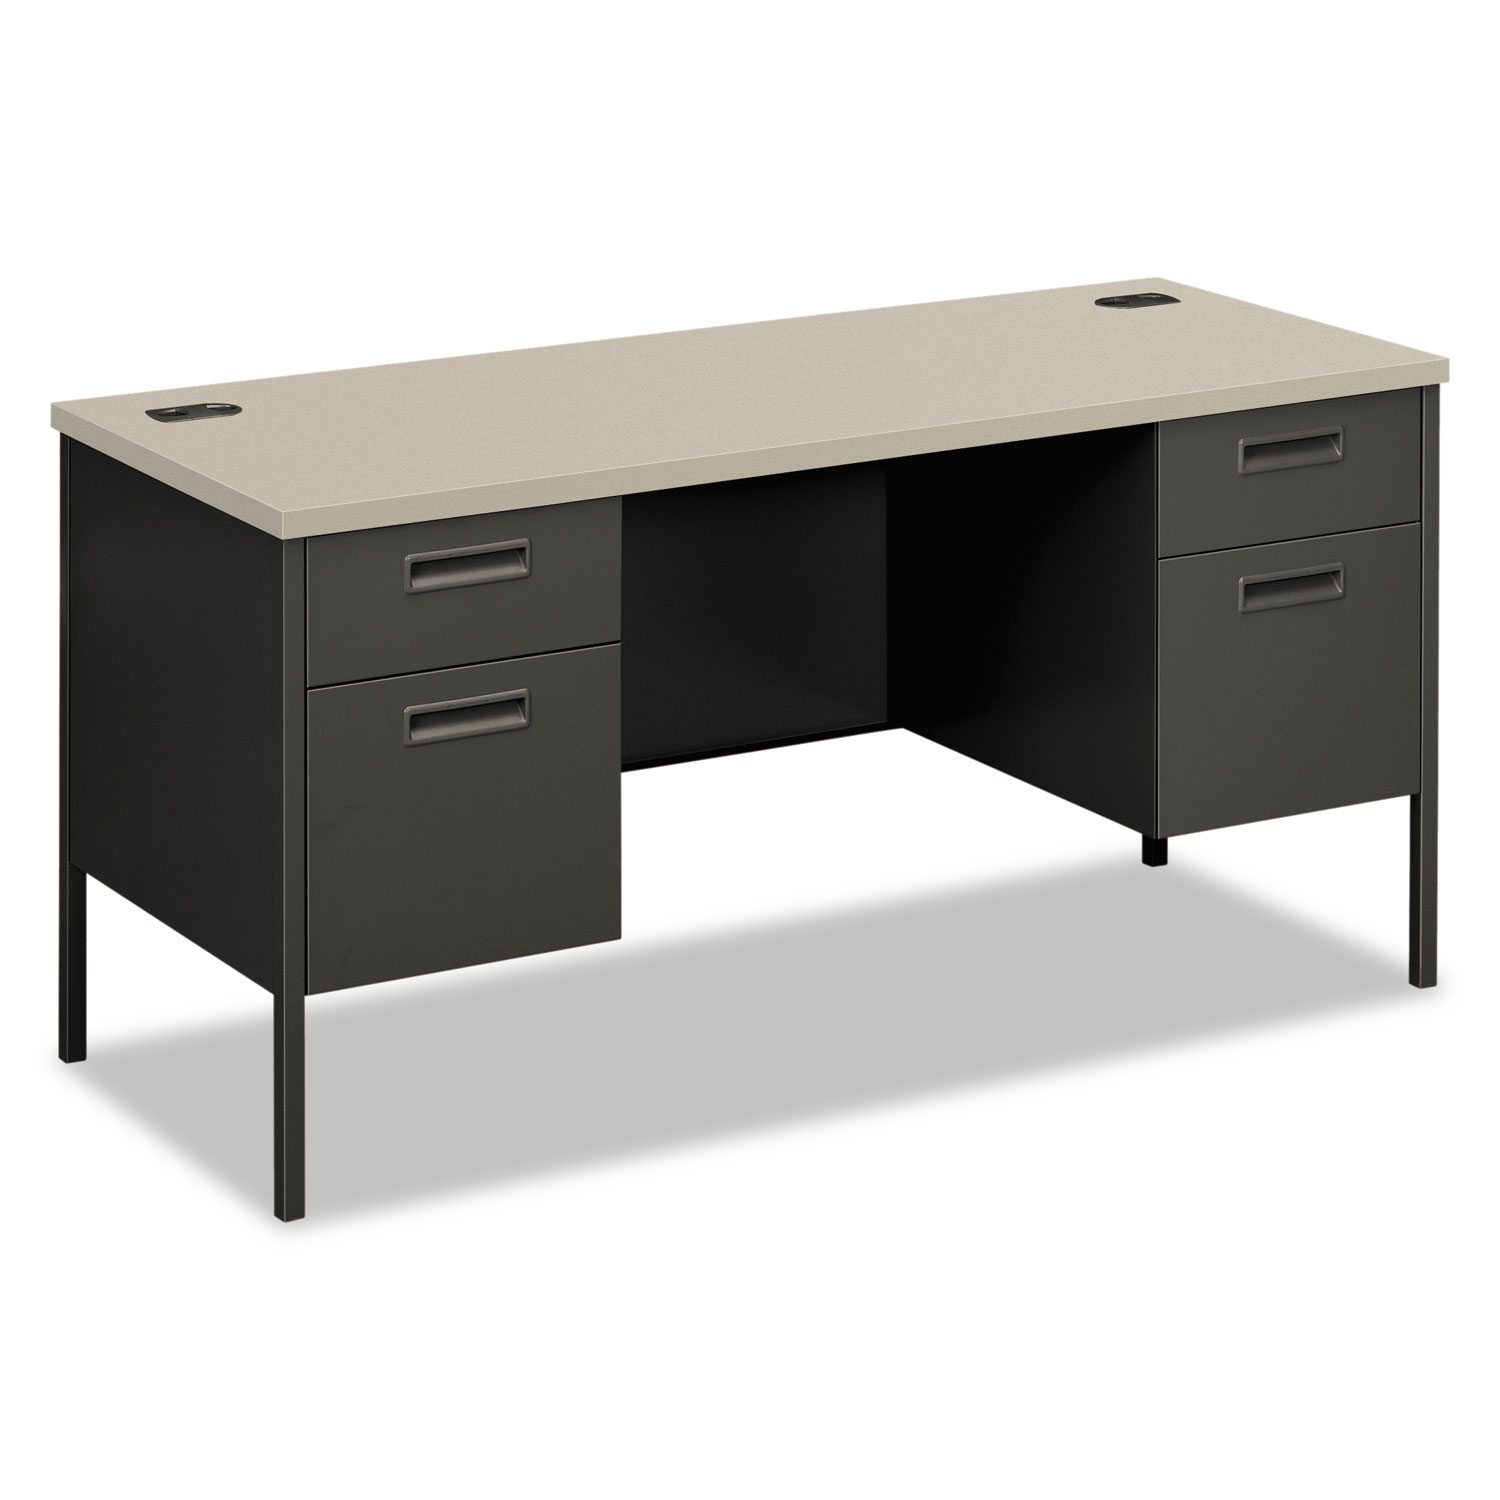 Metro Series Kneespace Credenza, 60w x 24d x 29 1/2h, Gray Patterned/Charcoal